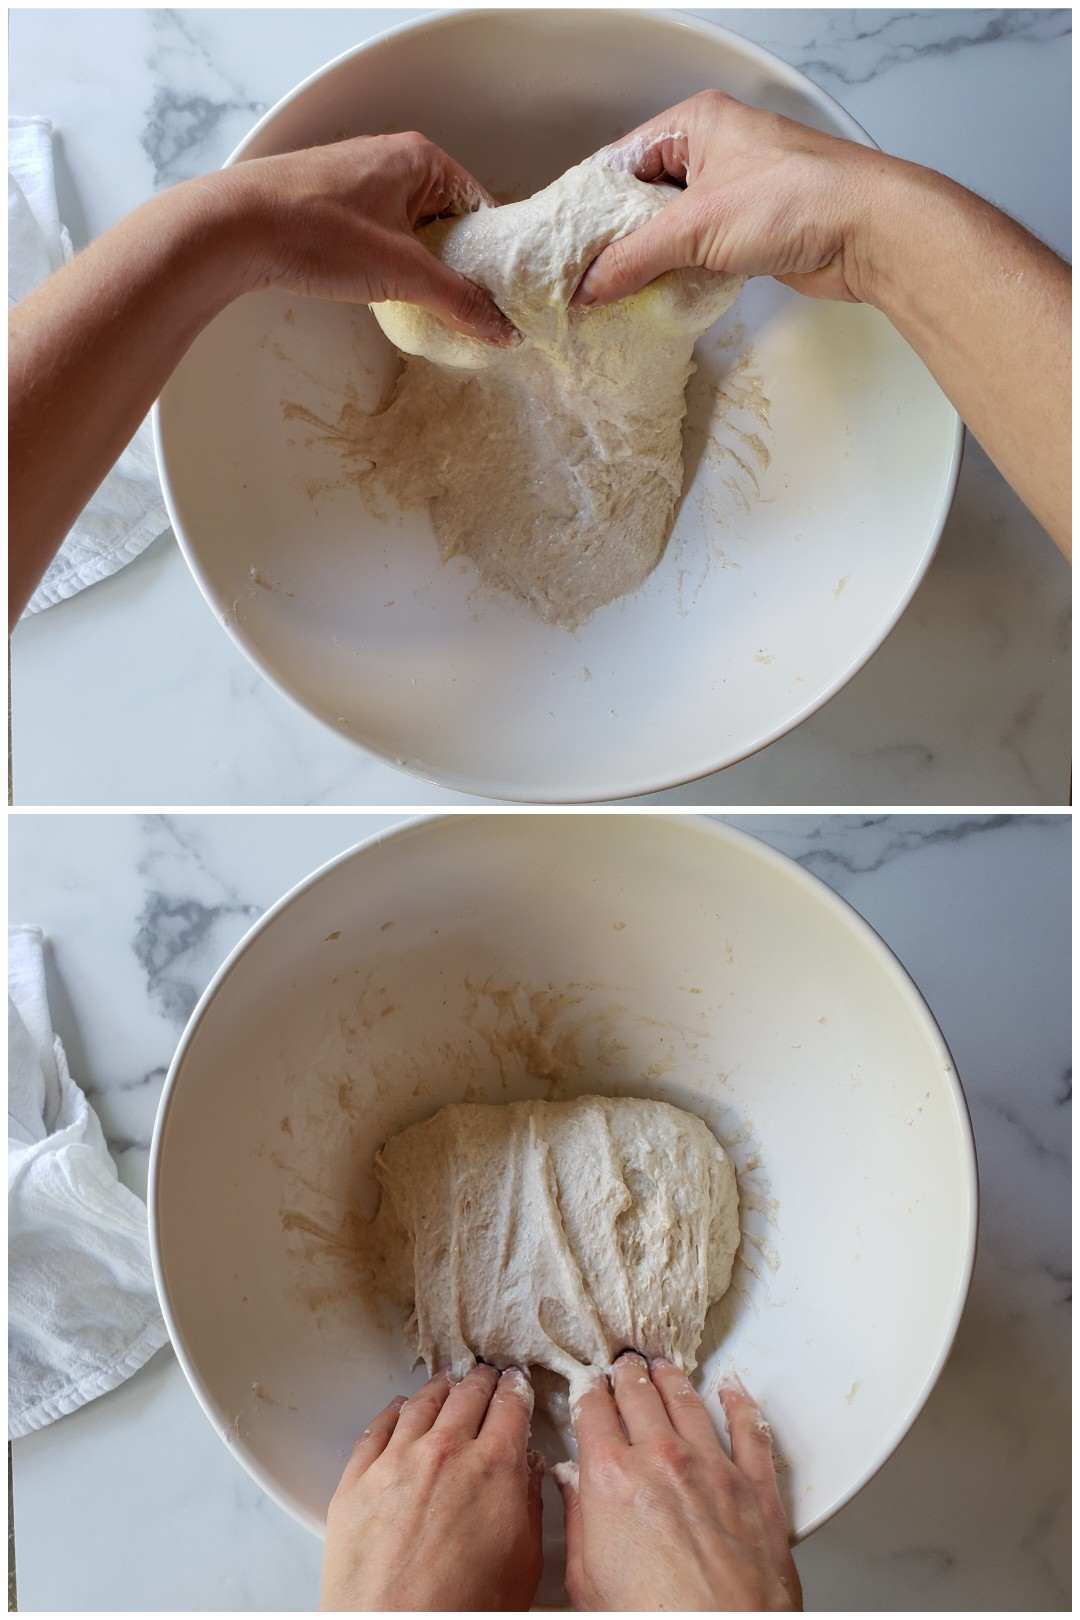 A two part image collage, the first image shows the mixed dough and a set of hands lifting part of the dough upwards. This is the stretch portion of a technique called "stretch and fold". The second image shows the fold portion of the "stretch and fold" which is folding the dough onto itself.